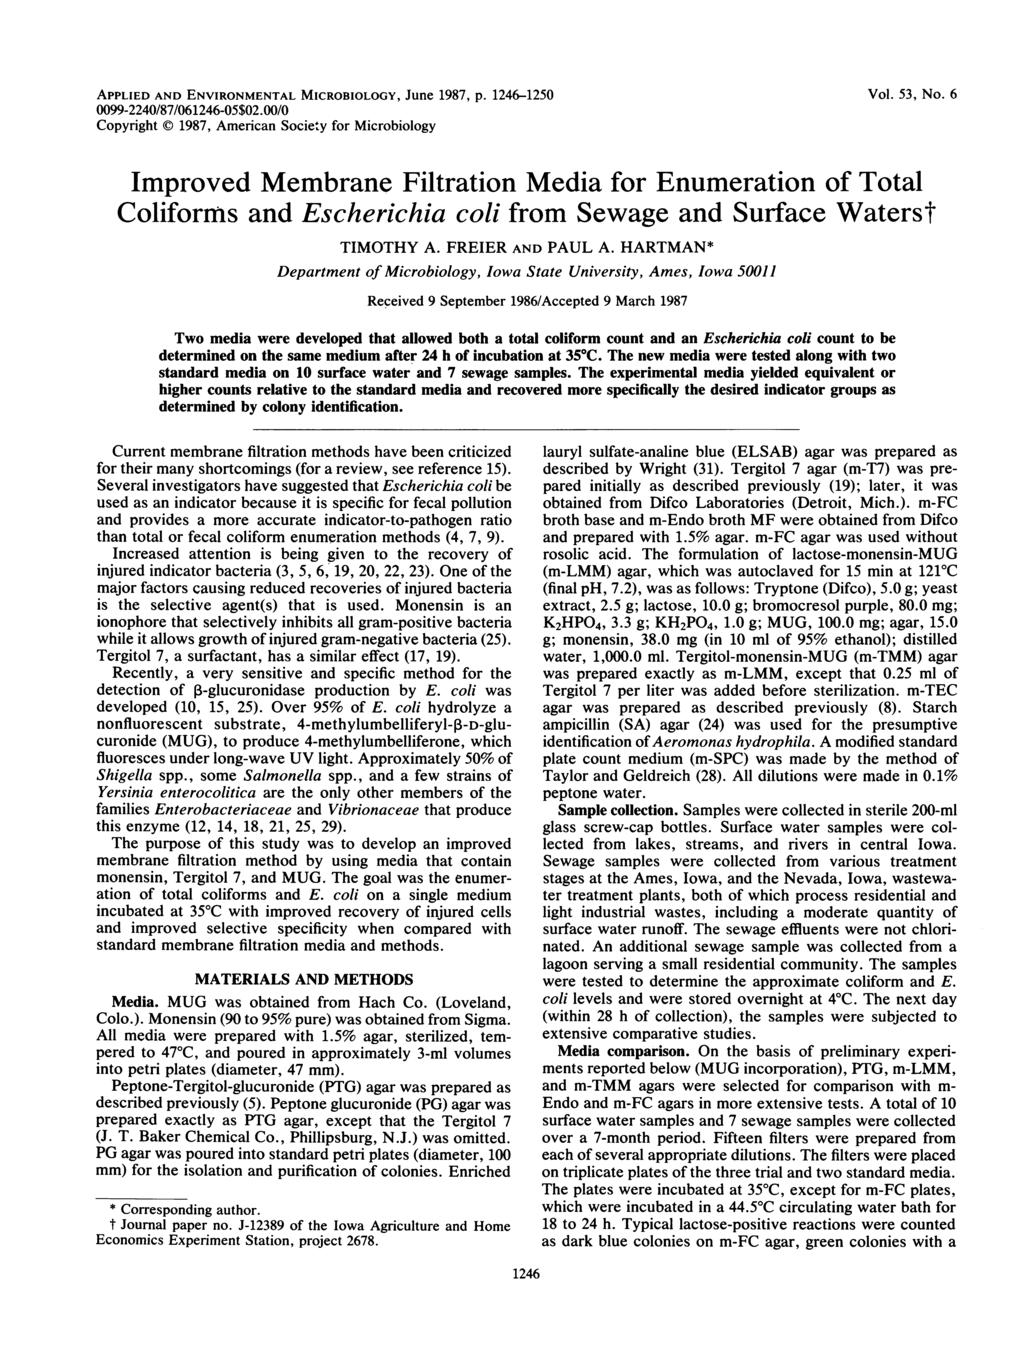 APPLIED AND ENVIRONMENTAL MICROBIOLOGY, June 1987, p. 1246-1250 0099-2240/87/061246-05$02.00/0 Copyright C) 1987, Americn Society for Microbiology Vol. 53, No.